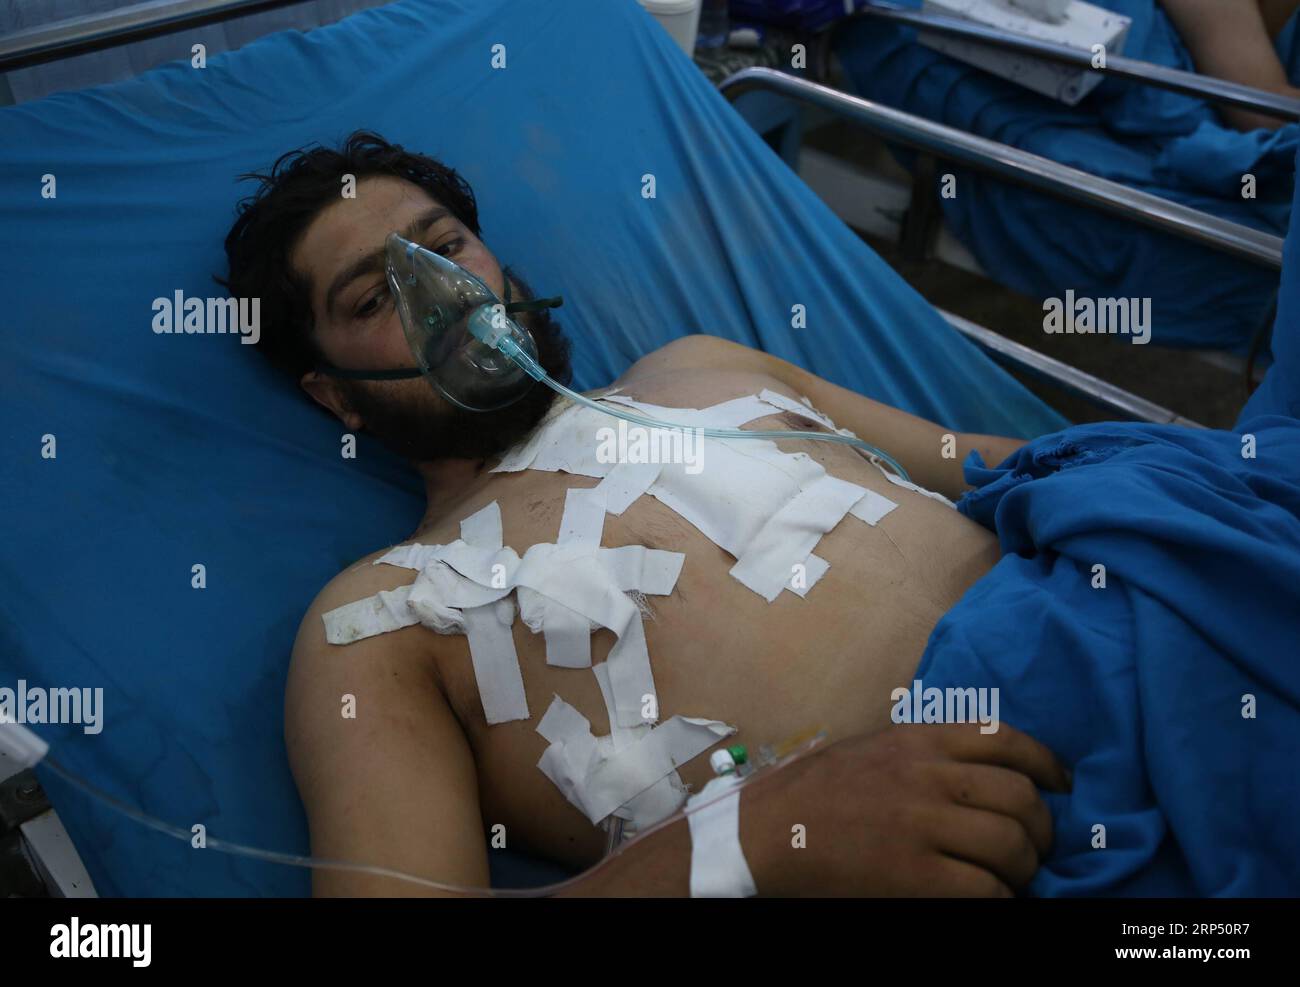 (181122) -- KABUL, Nov. 22, 2018 -- An injured man receives medical treatment at Wazir Akbar Khan hospital in Kabul, Afghanistan, Nov. 22, 2018. On Tuesday evening, a suicide bomber detonated his explosive belt at a wedding hall where scores of religious scholars and ordinary people were celebrating the birthday of Muslims Prophet Mohammad, killing over 60 and injuring more than 90 others, according to latest figures by the country s Ministry of Public Health. ) AFGHANISTAN-KABUL-SUICIDE ATTACK-HOSPITAL RahmatxAlizadah PUBLICATIONxNOTxINxCHN Stock Photo